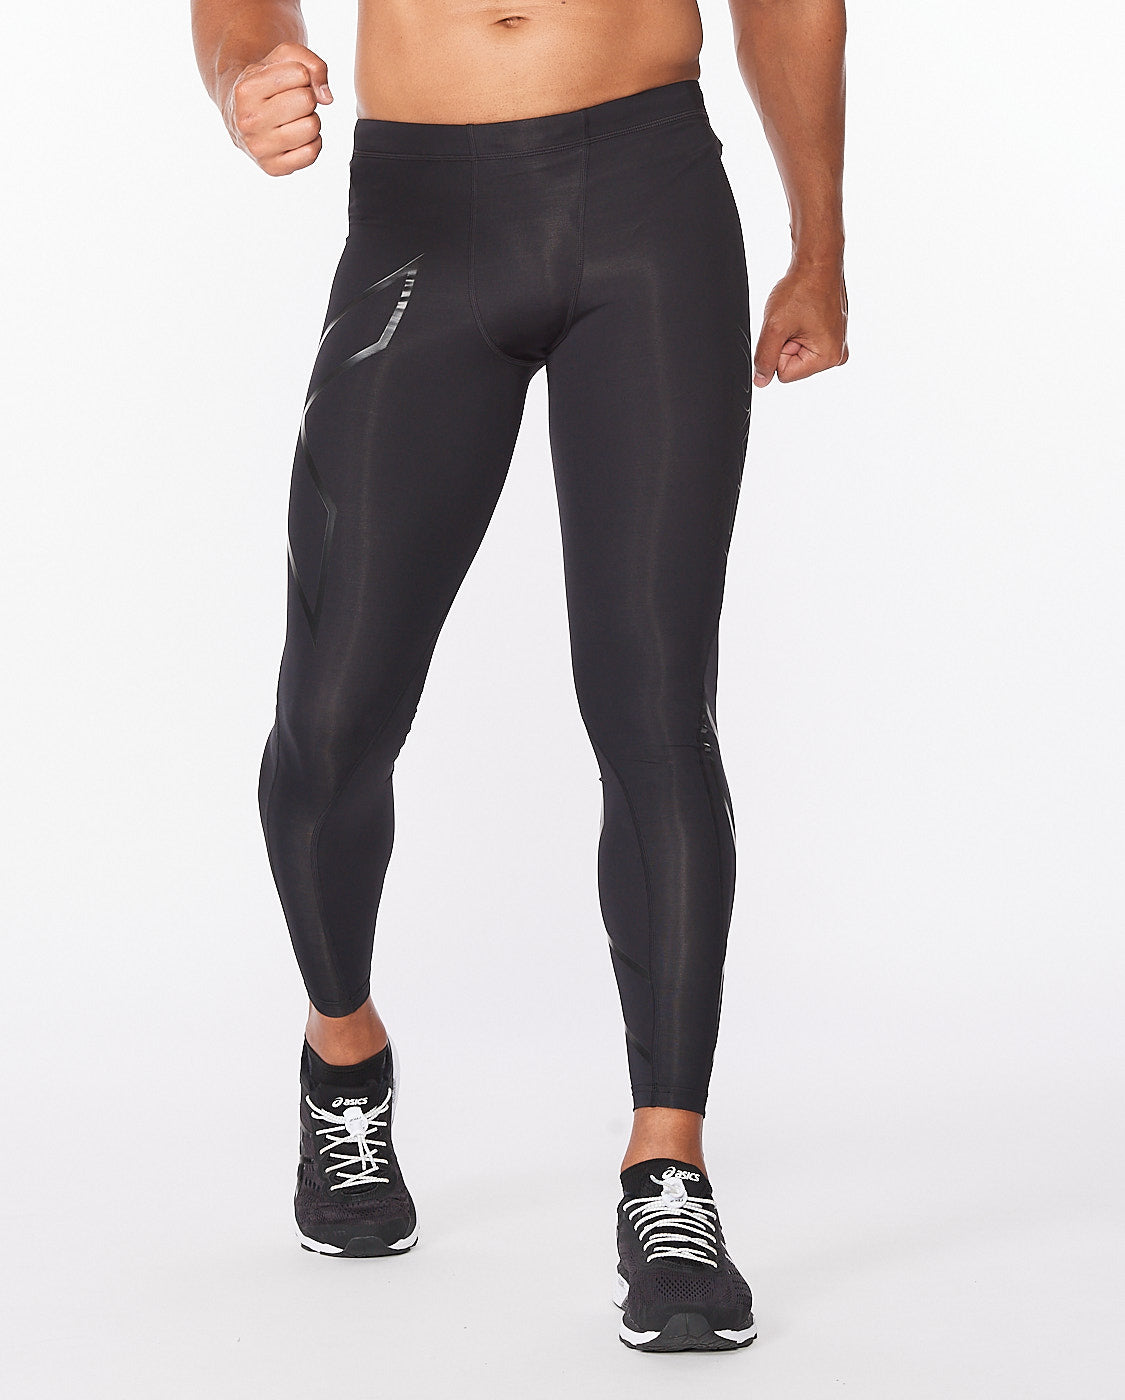 RAE-MODE-LUX-BUTTER-FULL-LENGTH-COMPRESSION-LEGGINGS – Synik Clothing